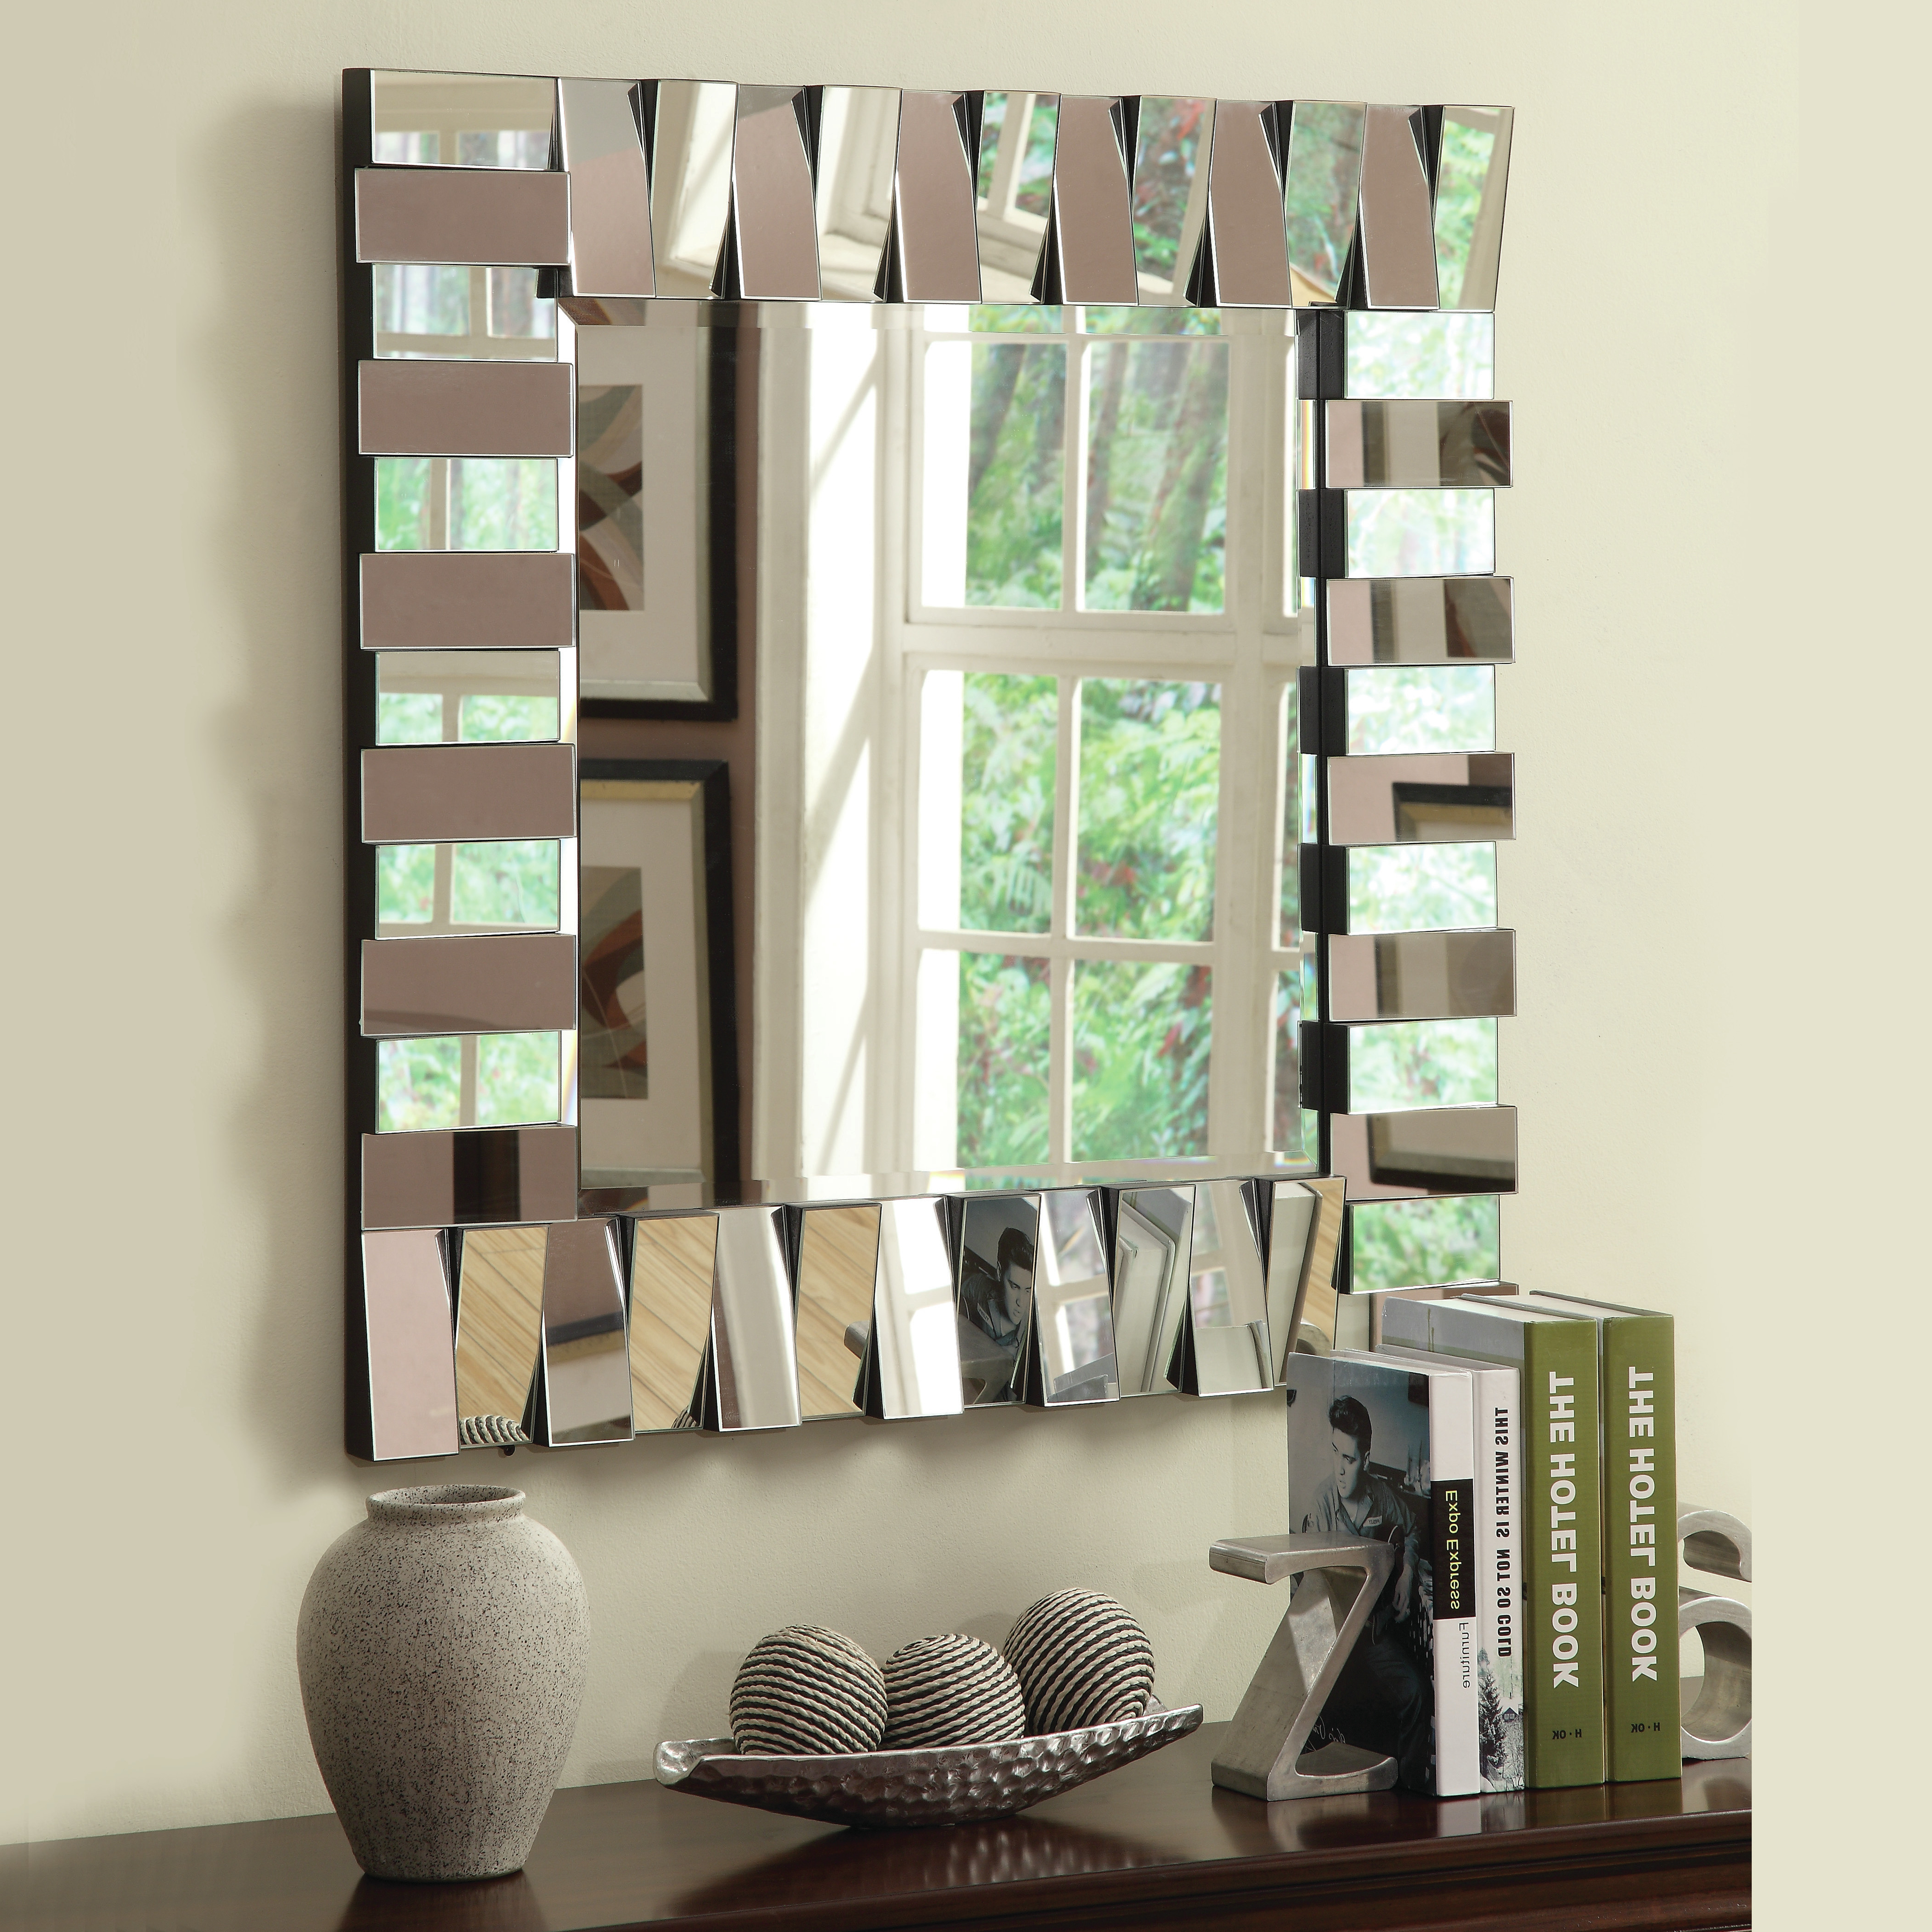 Mirror Wall Decor Ideas: Reflecting Unique Style In Your Home